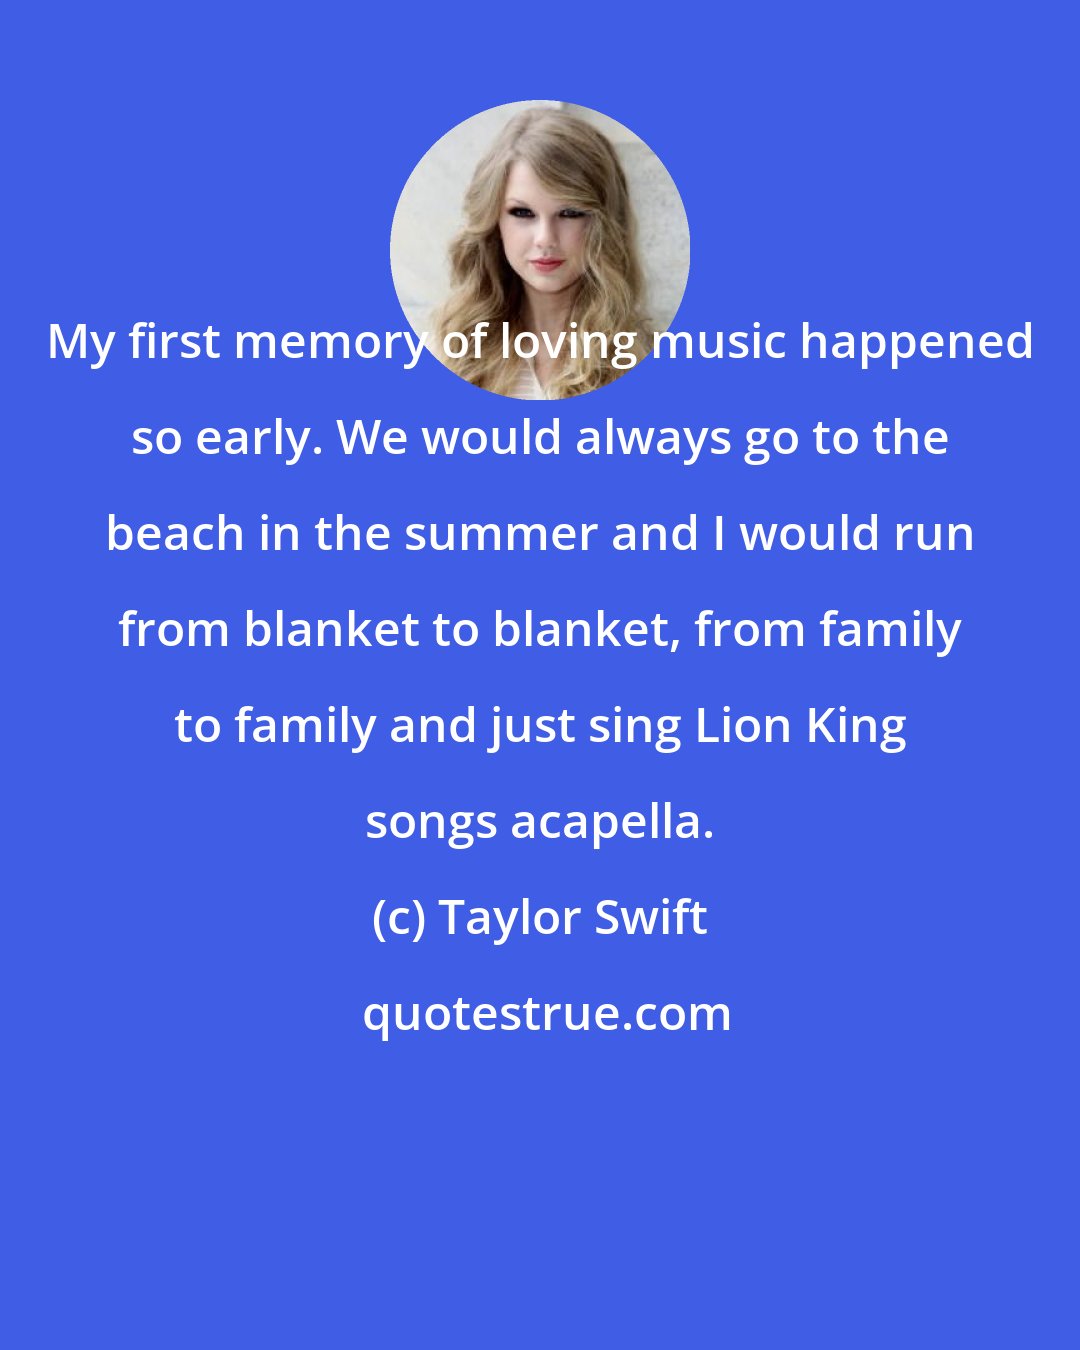 Taylor Swift: My first memory of loving music happened so early. We would always go to the beach in the summer and I would run from blanket to blanket, from family to family and just sing Lion King songs acapella.